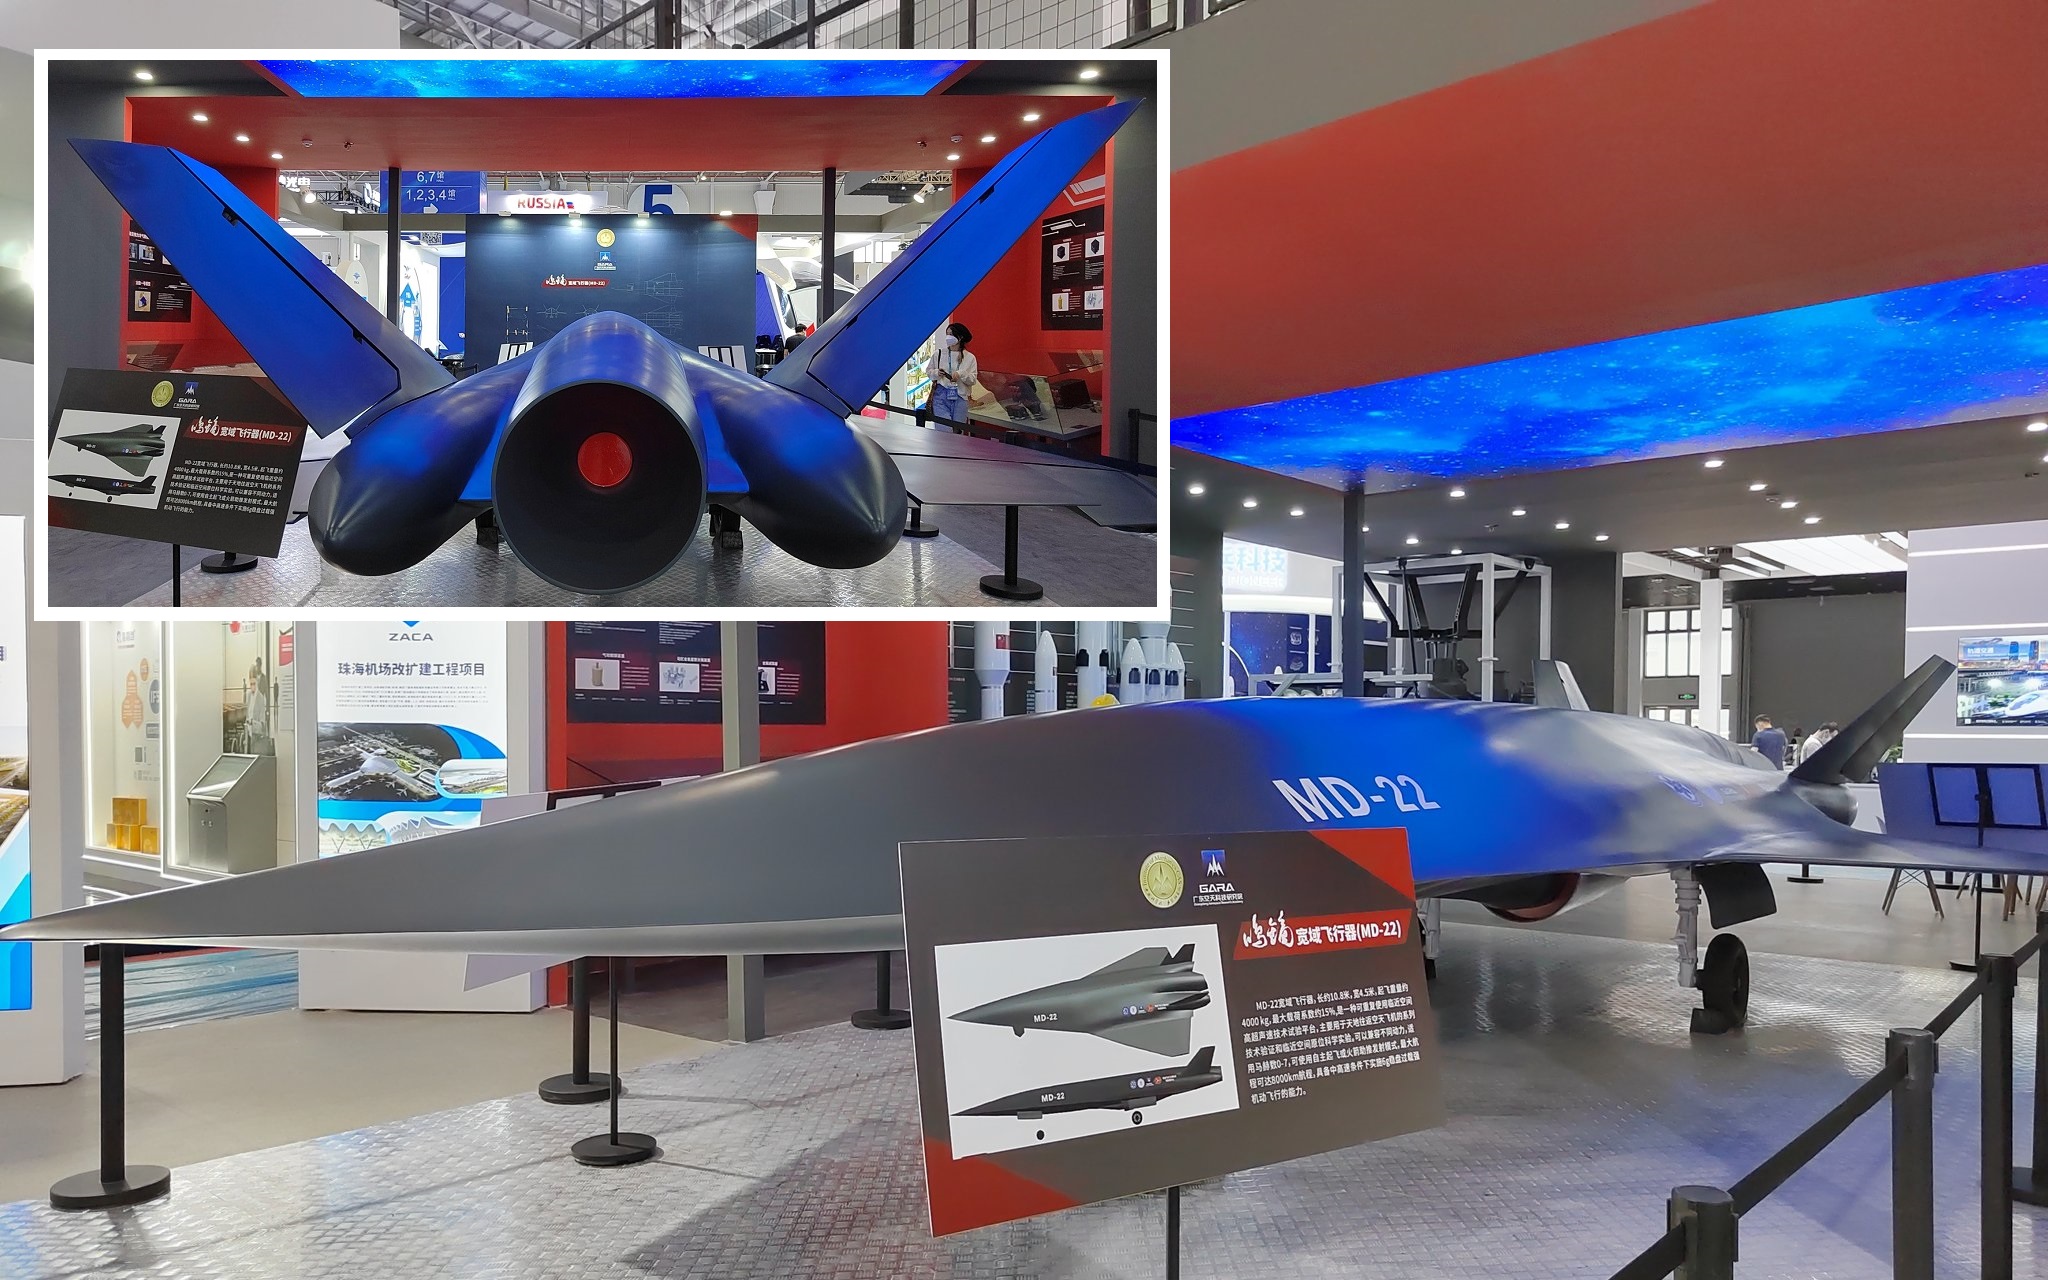 has developed an MD-22 drone with a flight speed of 8,645 km/h, a range of 8,000 km, and a payload of 4,000 kg to test hypersonic technology | gagadget.com